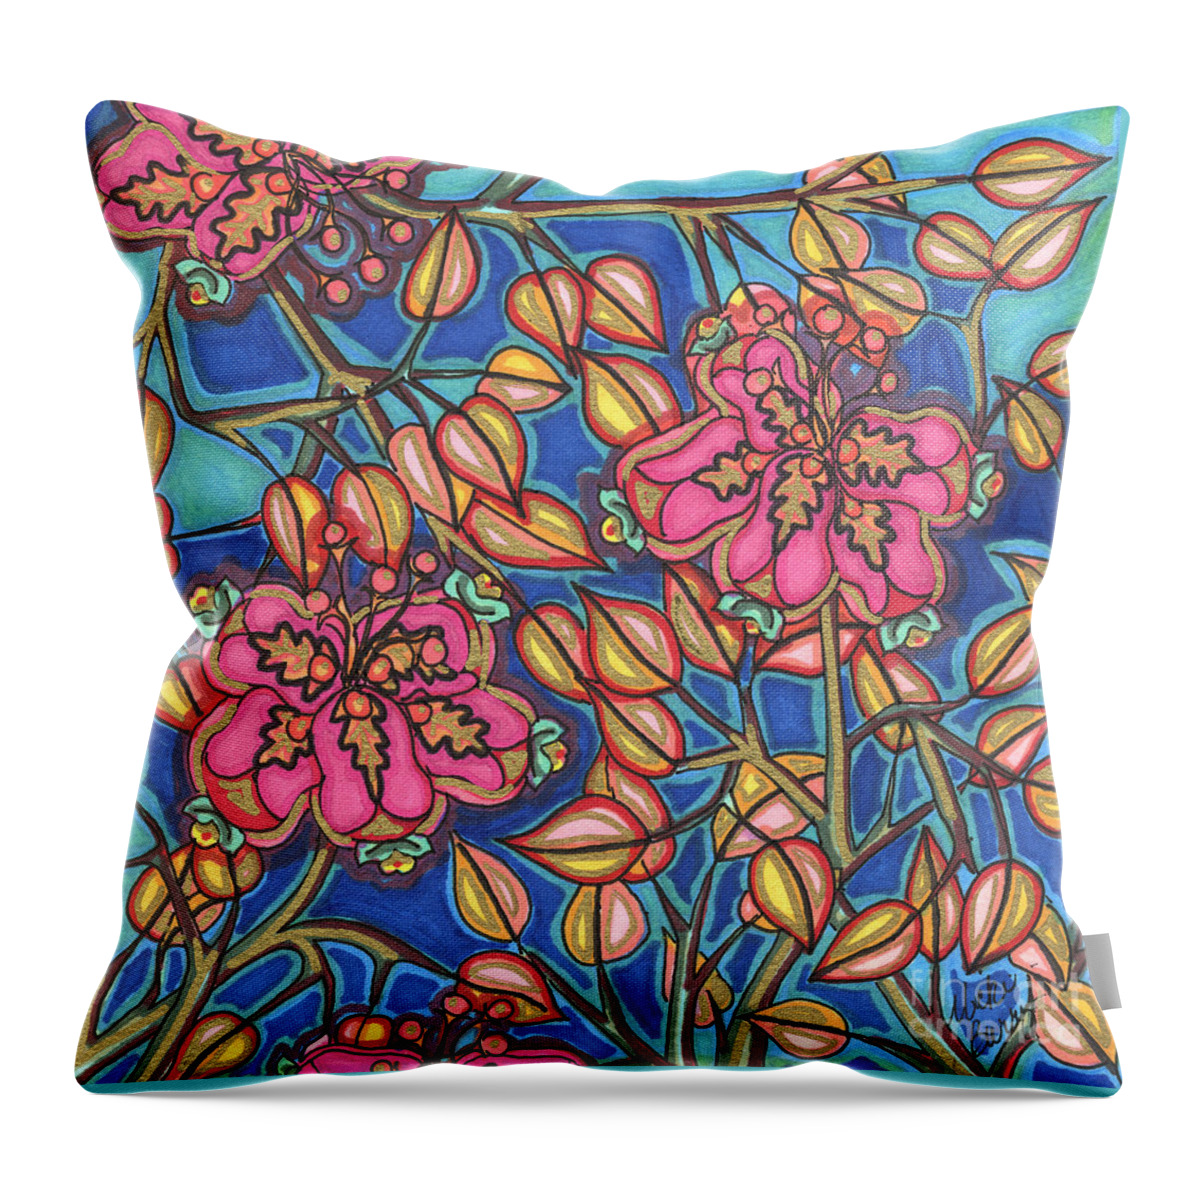 Modern Throw Pillow featuring the painting Wild Flowers by Vicki Baun Barry